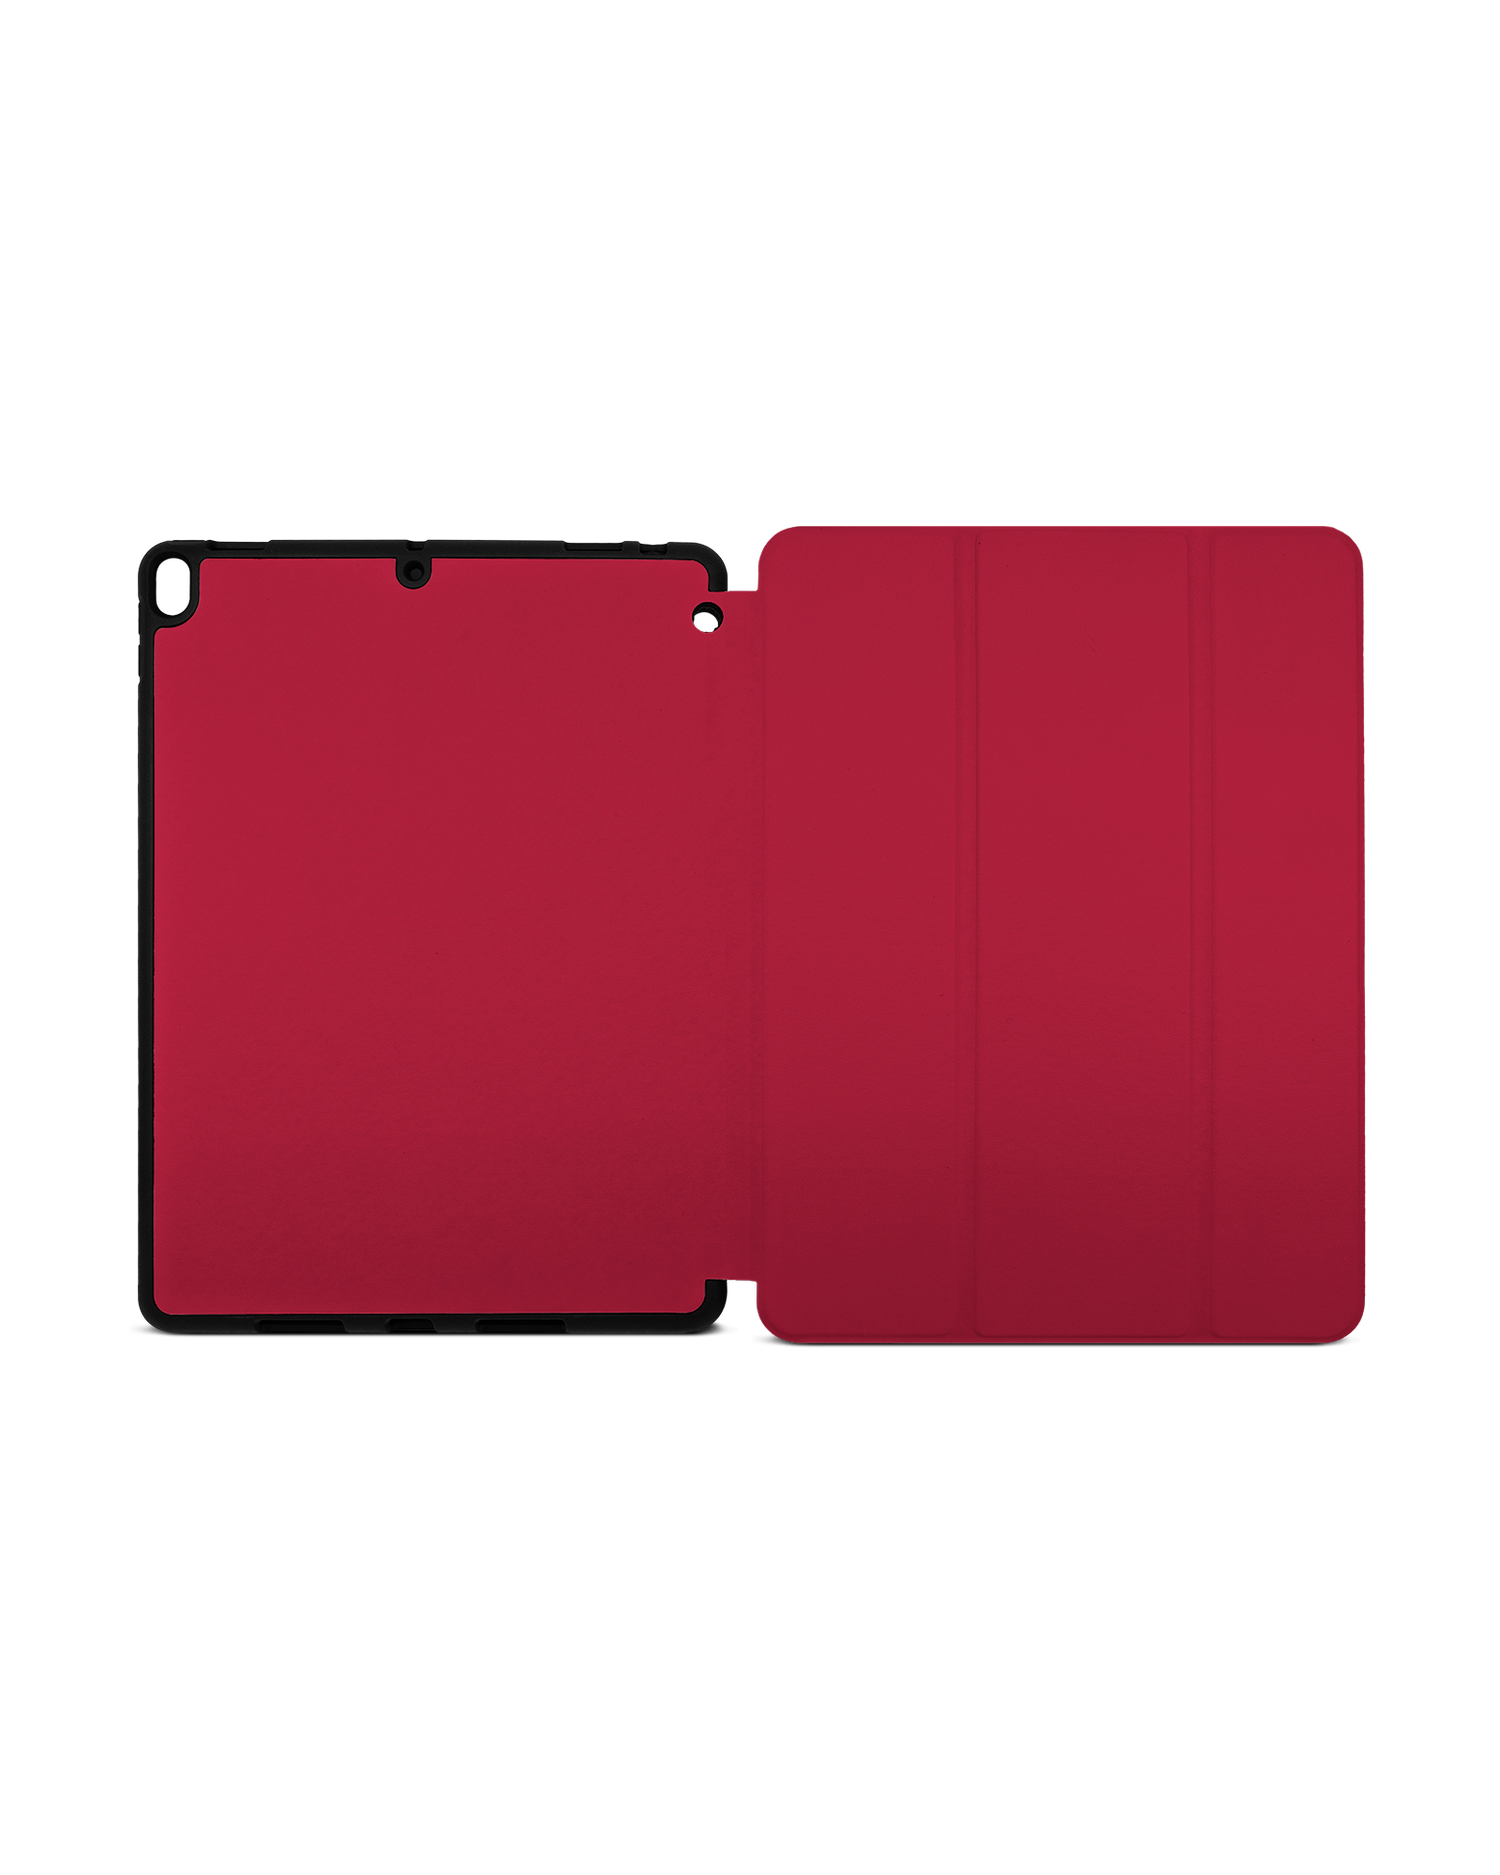 RED iPad Case with Pencil Holder Apple iPad Pro 10.5